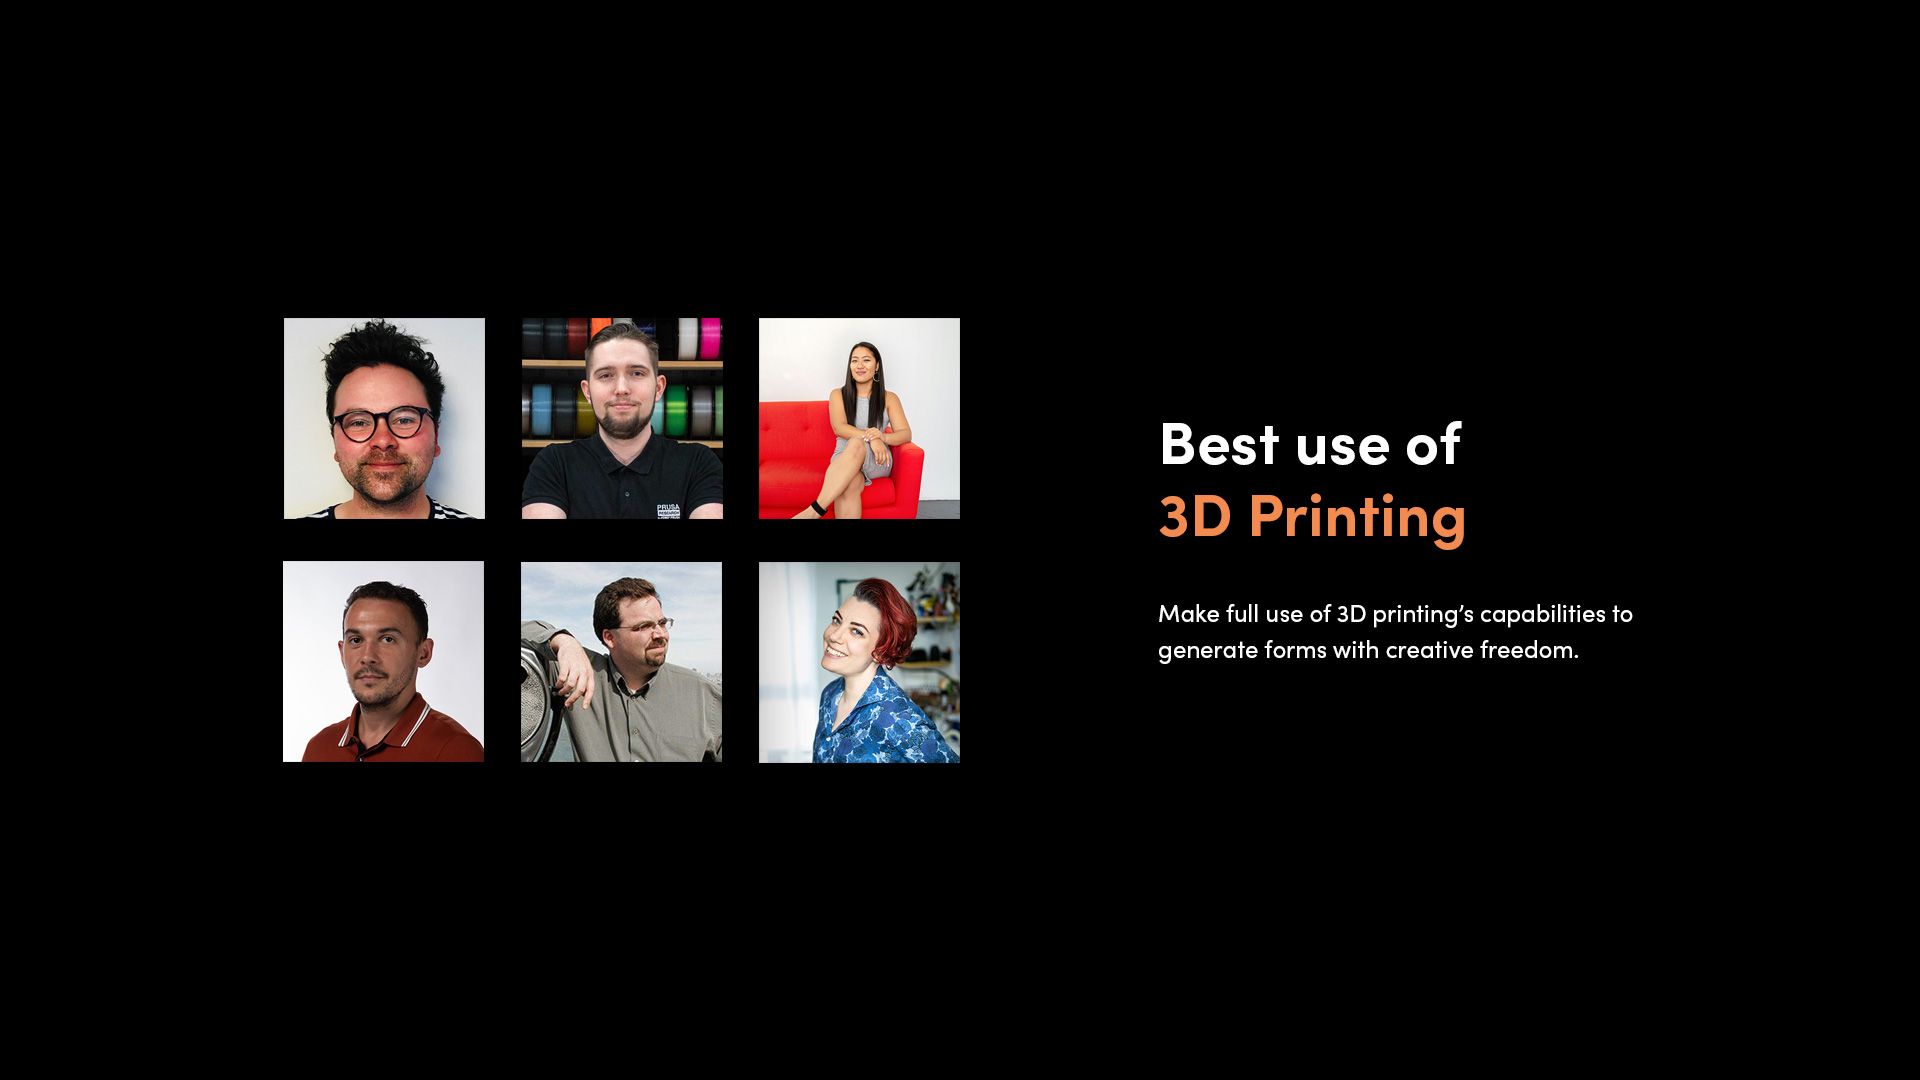 Collage of headshots showing the 3D Printing judging panel for the Make:able Challenge.